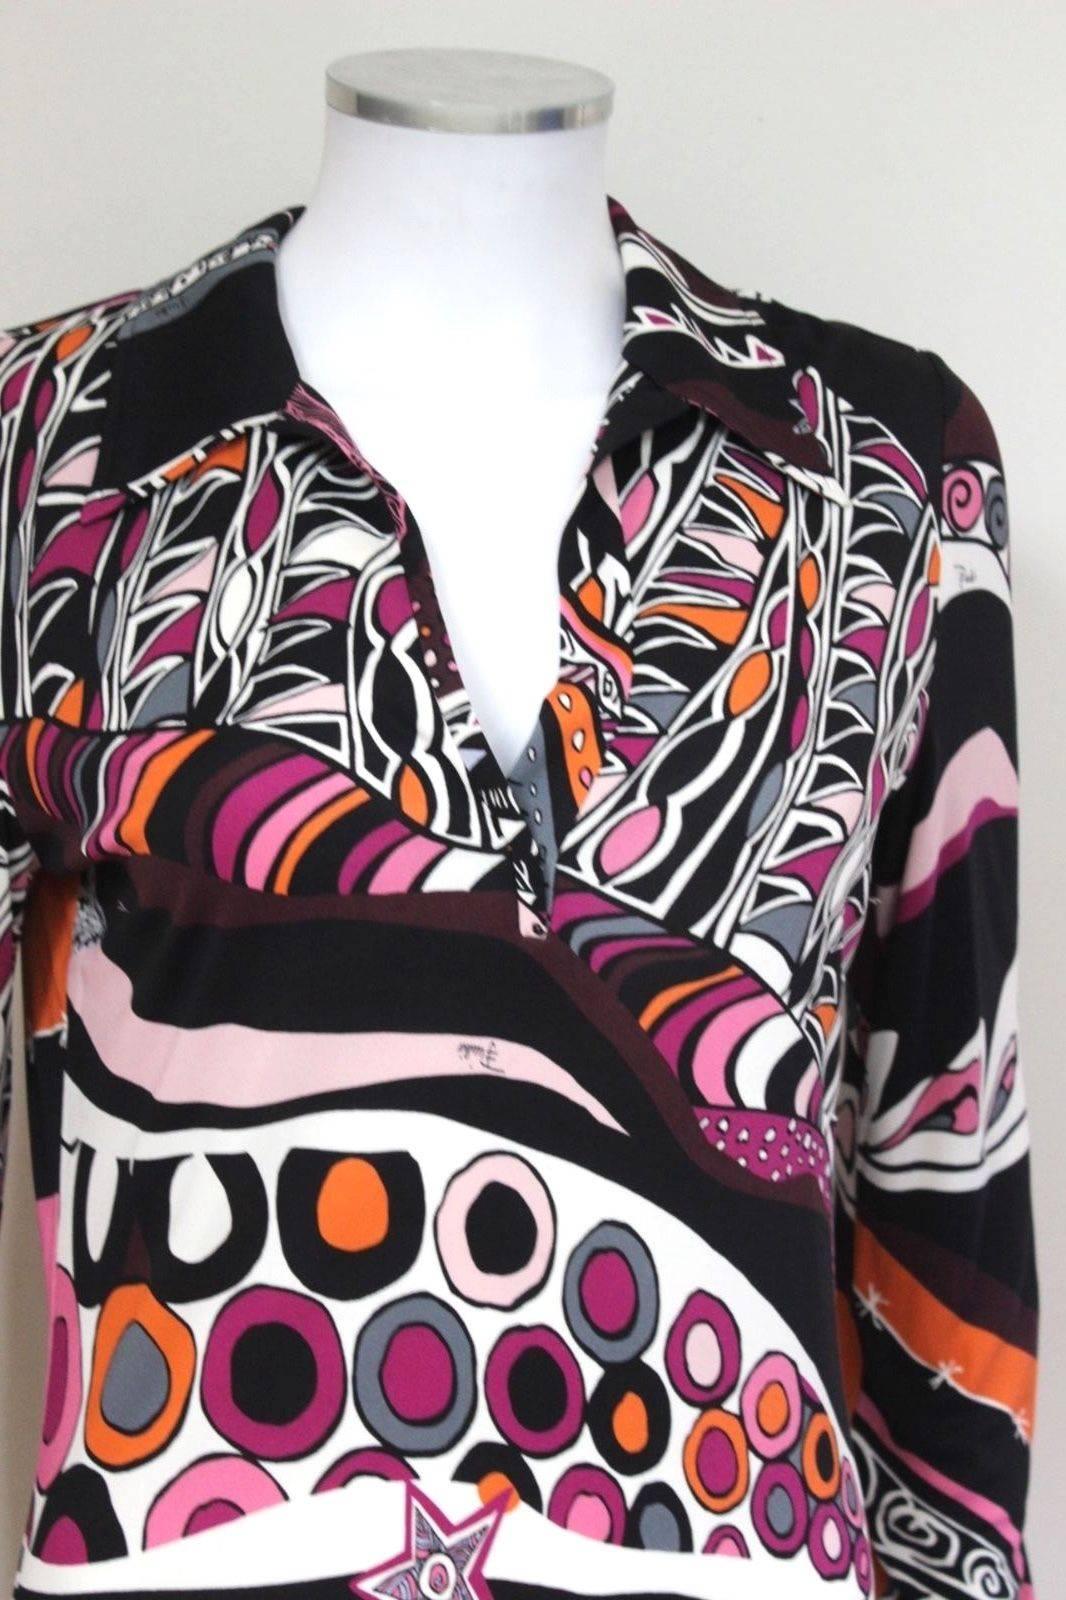 New Emilio Pucci Black Pink Print Shift Collar Dress It 42 uk 10 
Gorgeous dress from Emilio Pucci with the unmistakable bold Pucci print 
Collared neck with cuffs 
Length 37 inches, chest 19 inches across, waist 16 inches across, hips 19 inches